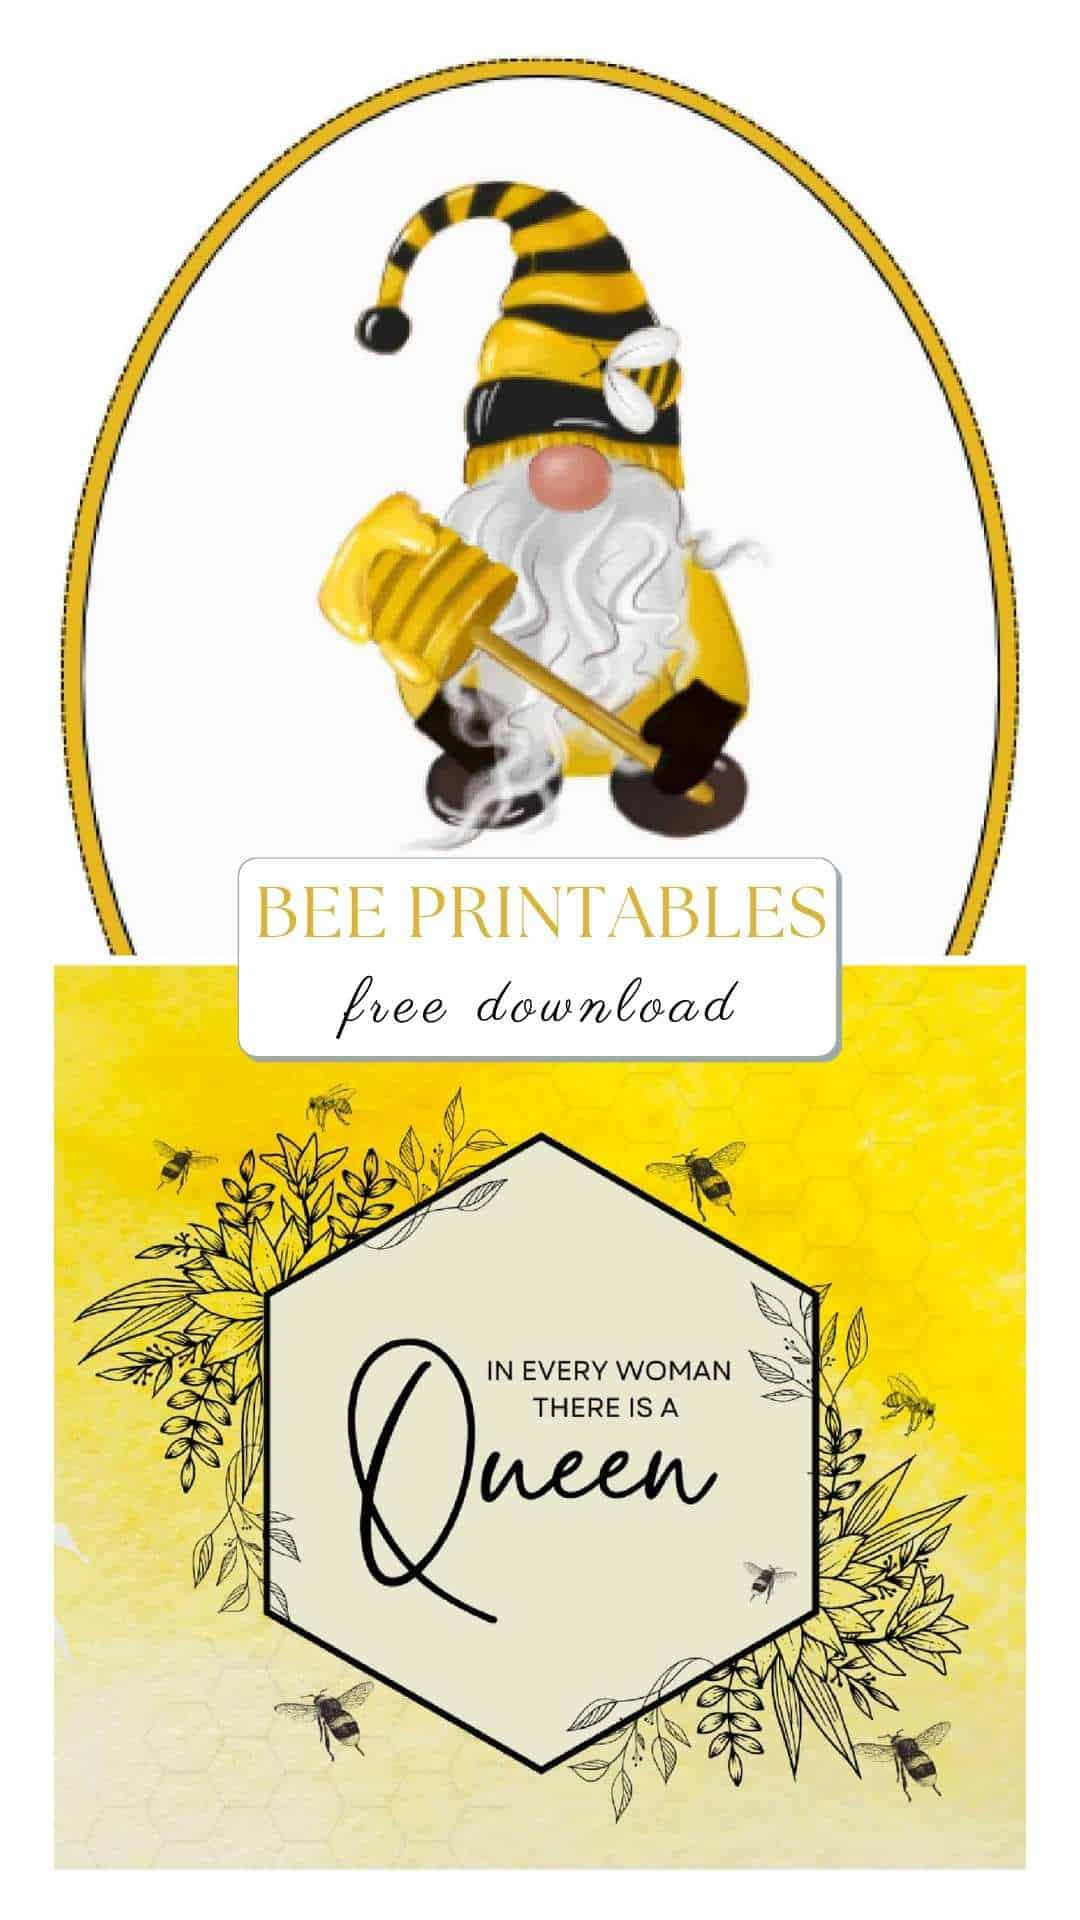 gnome bee printable and queen bee printable